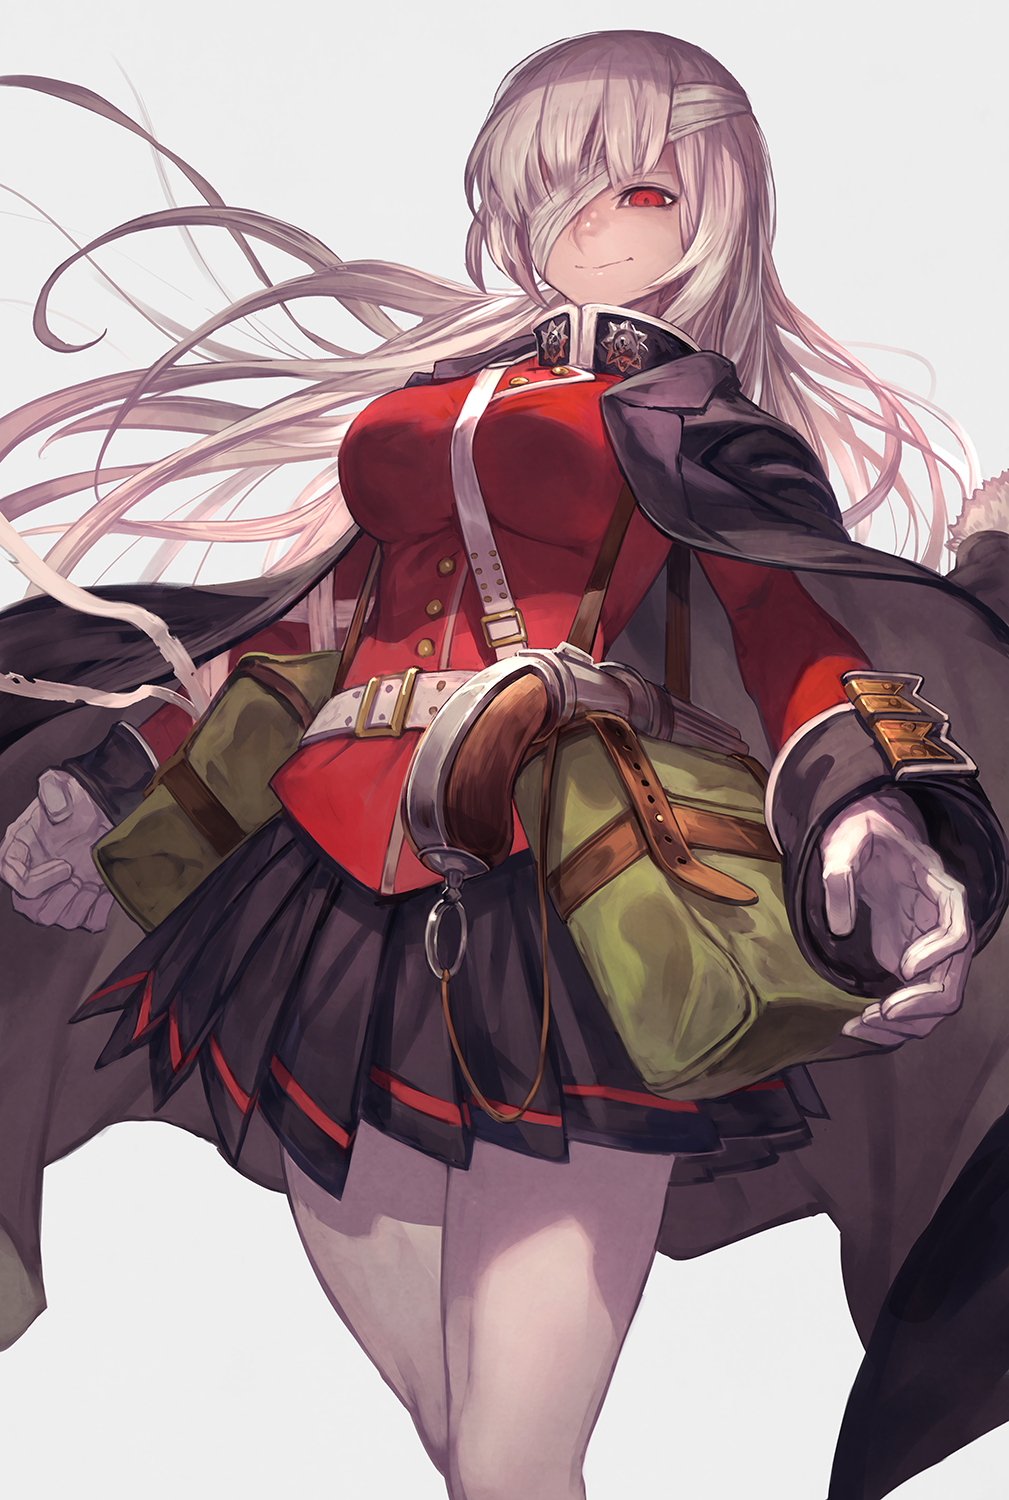 Anime Anime Girls Fate Series Fate Grand Order Florence Nightingale Fate Grand Order Long Hair Silve 1009x1500